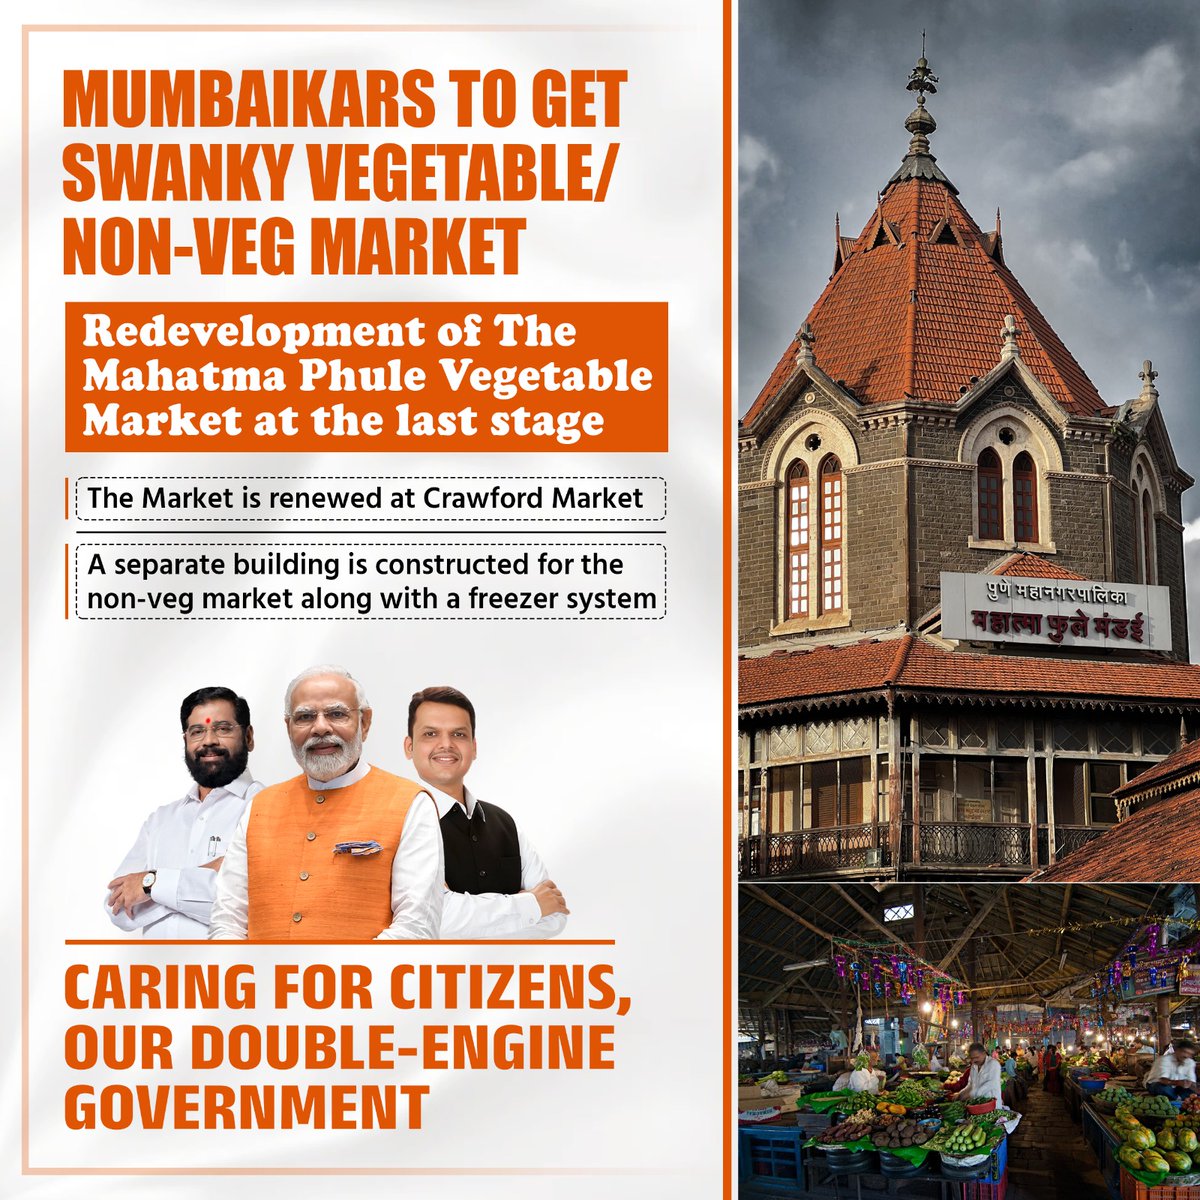 From farm to table, the journey just got better! The soon-to-be-unveiled Mahatma Phule Vegetable Market promises convenience and freshness for Mumbaikars. A round of applause for CM Eknath Shinde's government for modernizing our city's markets!